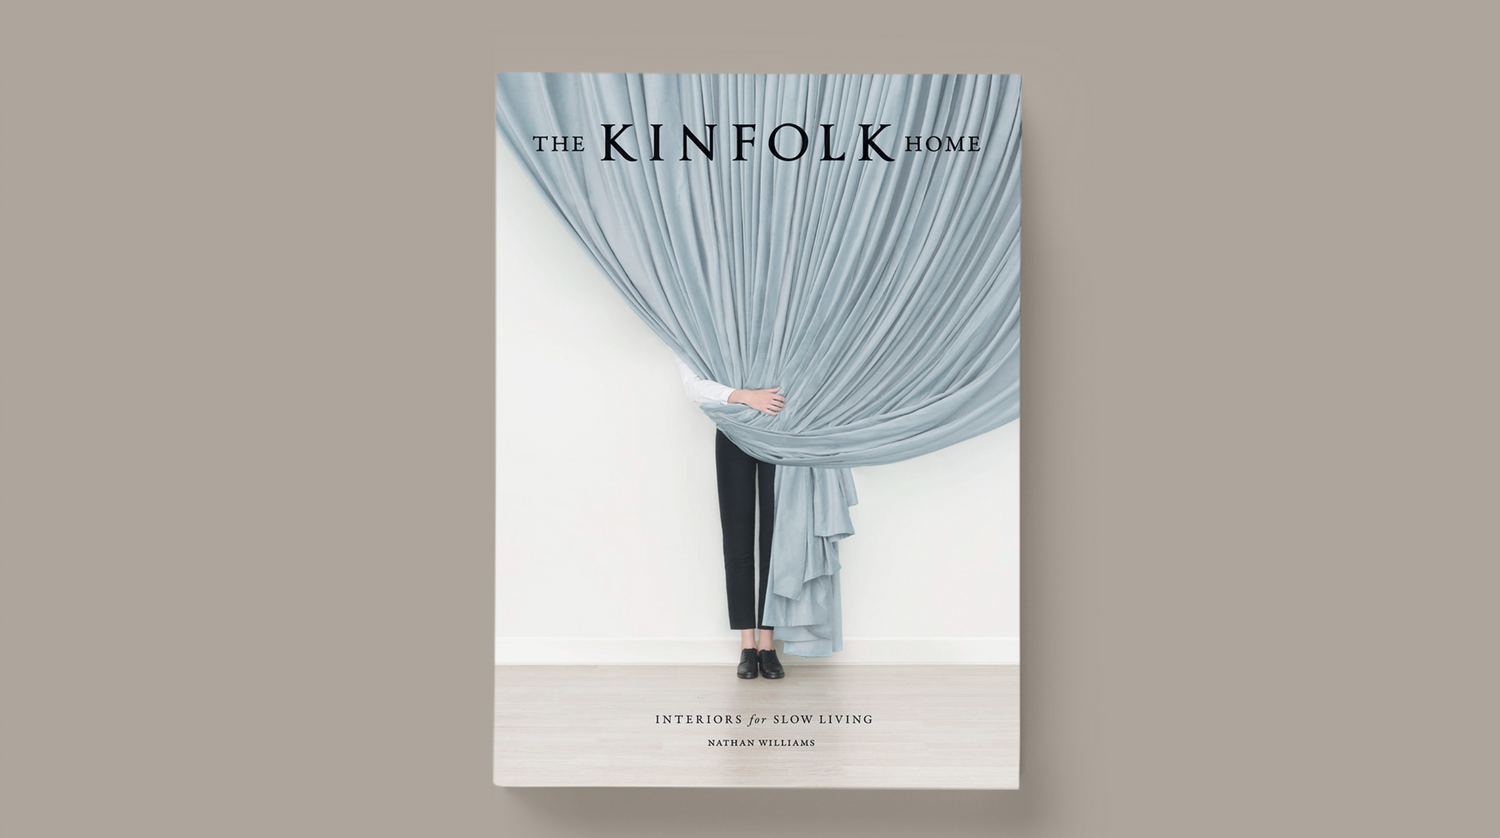 5 Takeaways From The Kinfolk Home - Interiors For Slow Living